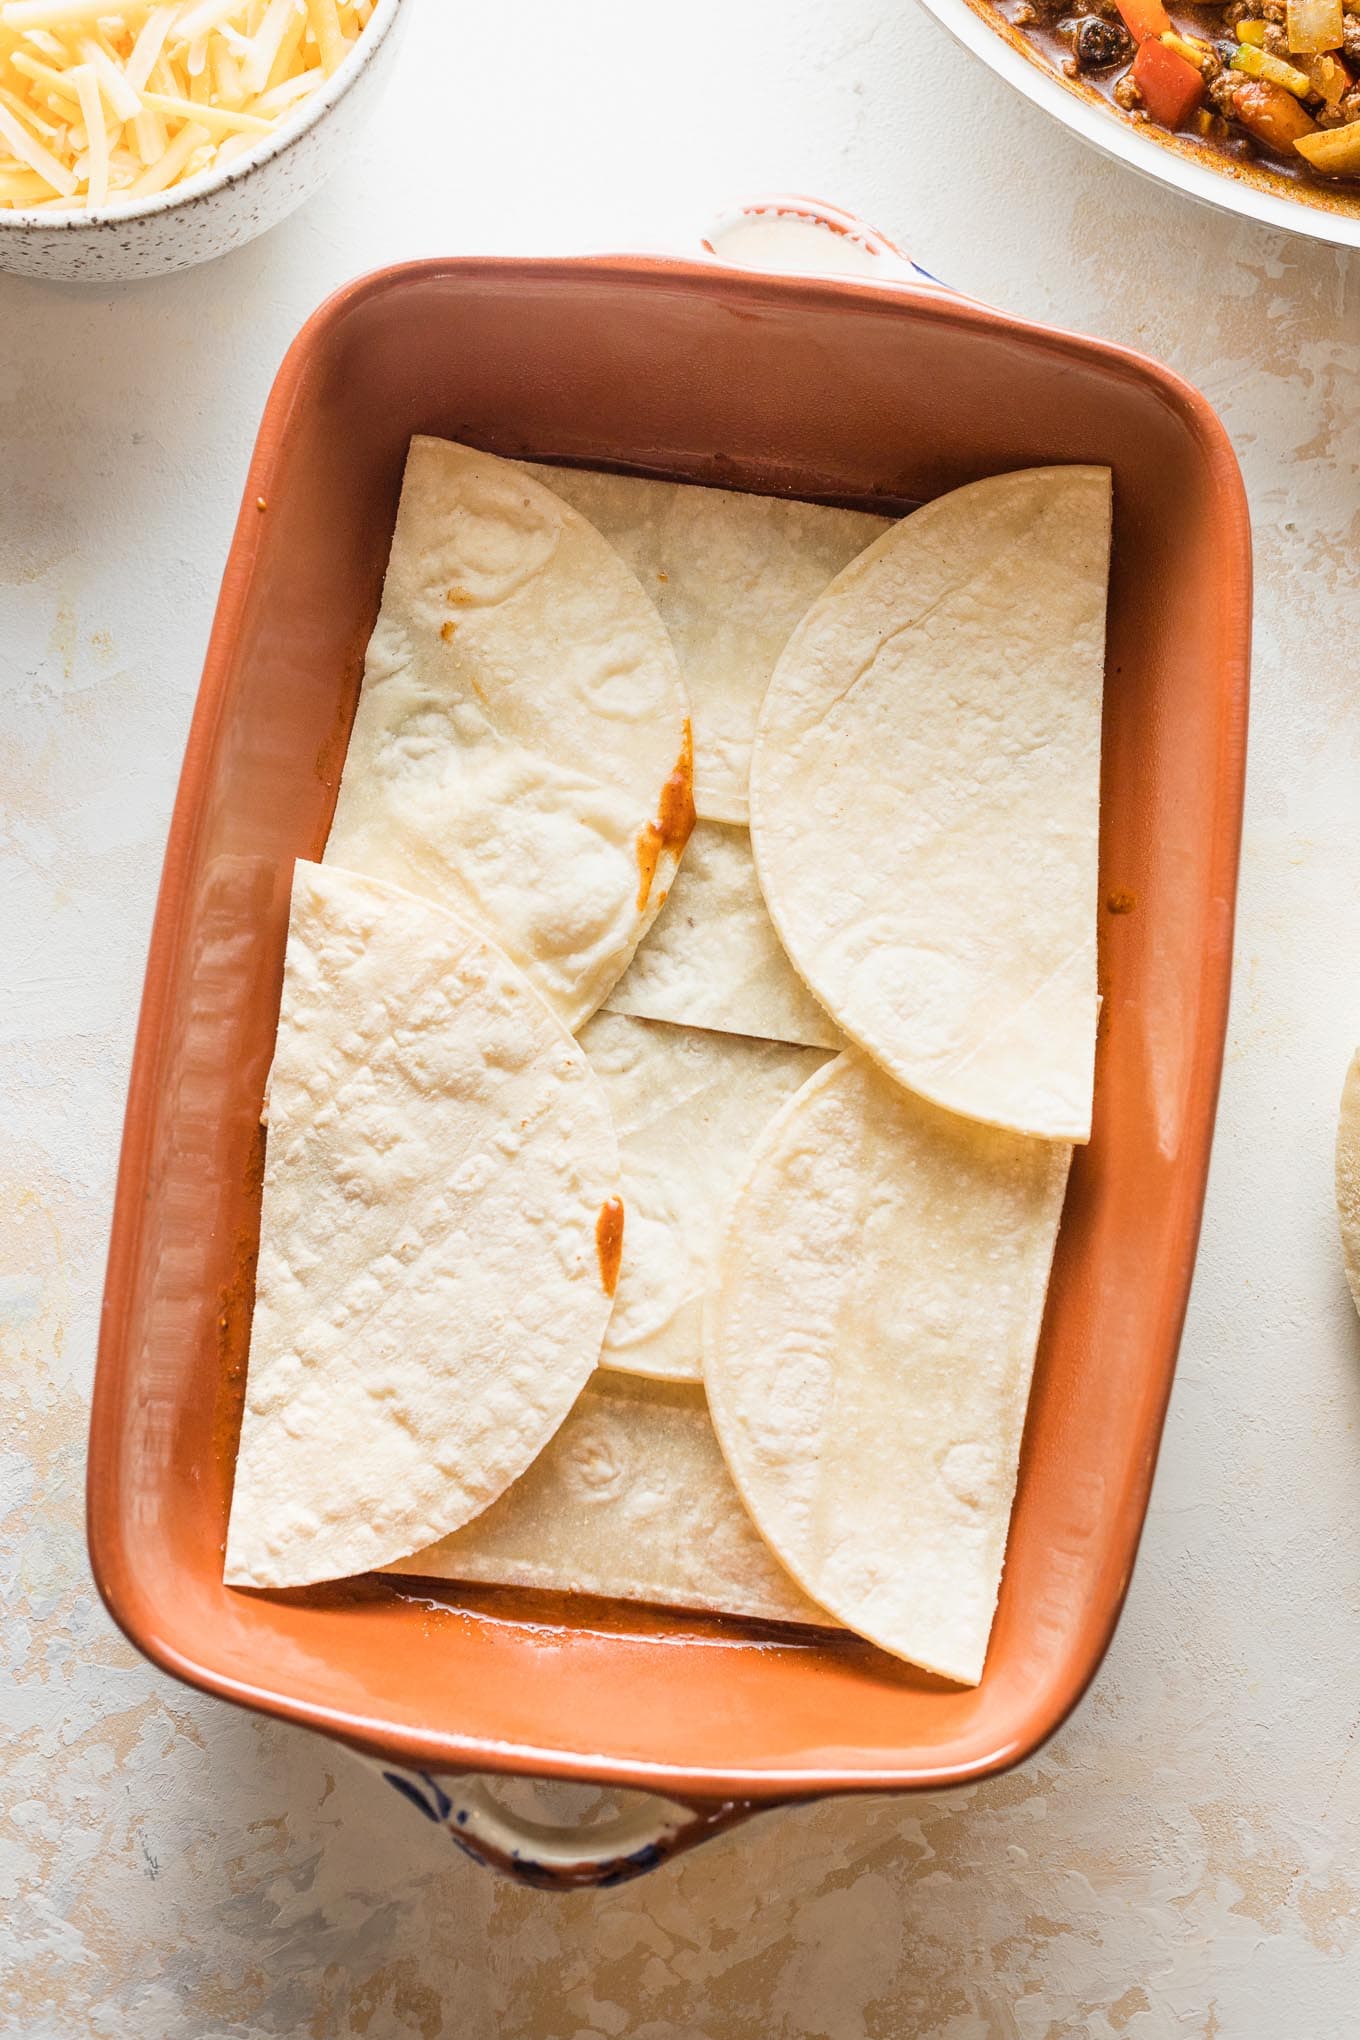 Tortillas cut in half and arranged to cover a baking pan.